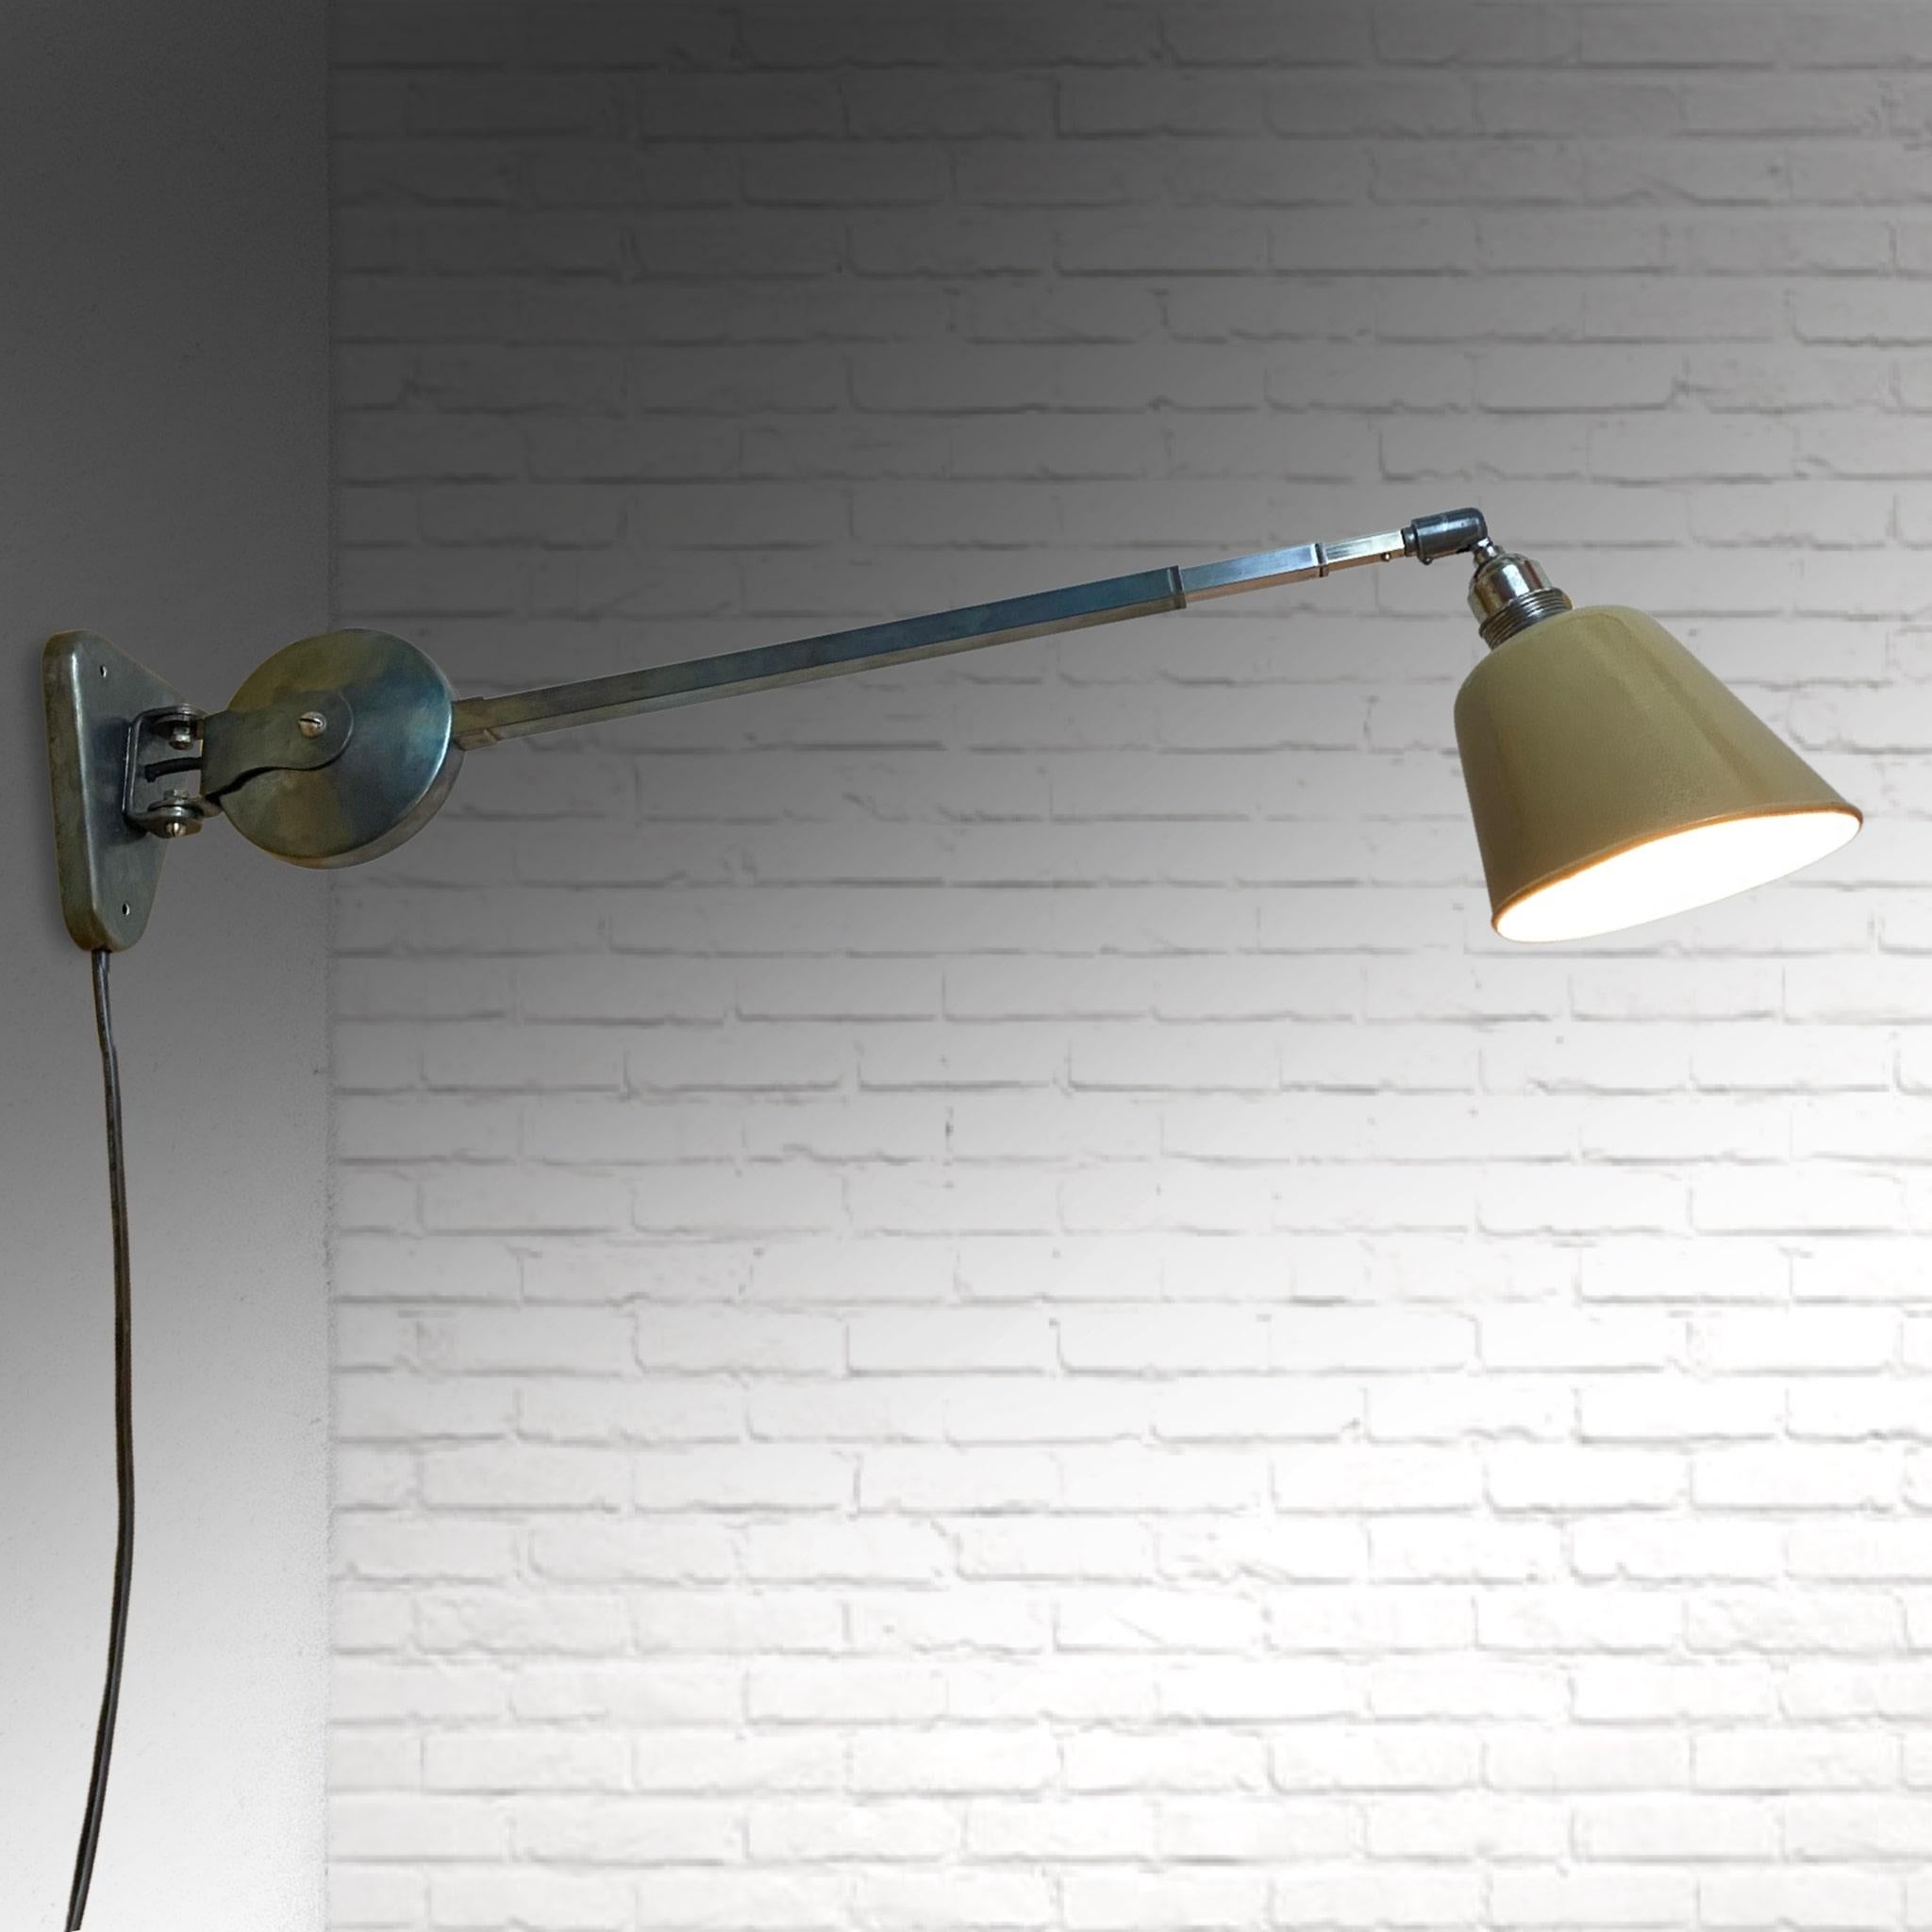 Industrial wall lamp produced by Metallwerke Schröder in the German town of Lobenstein in the 1940’s. Noteworthy features include an adjustable telescope arm and a ball-shaped light switch on the lamp holder. The wall mount bears the hallmark MWS.